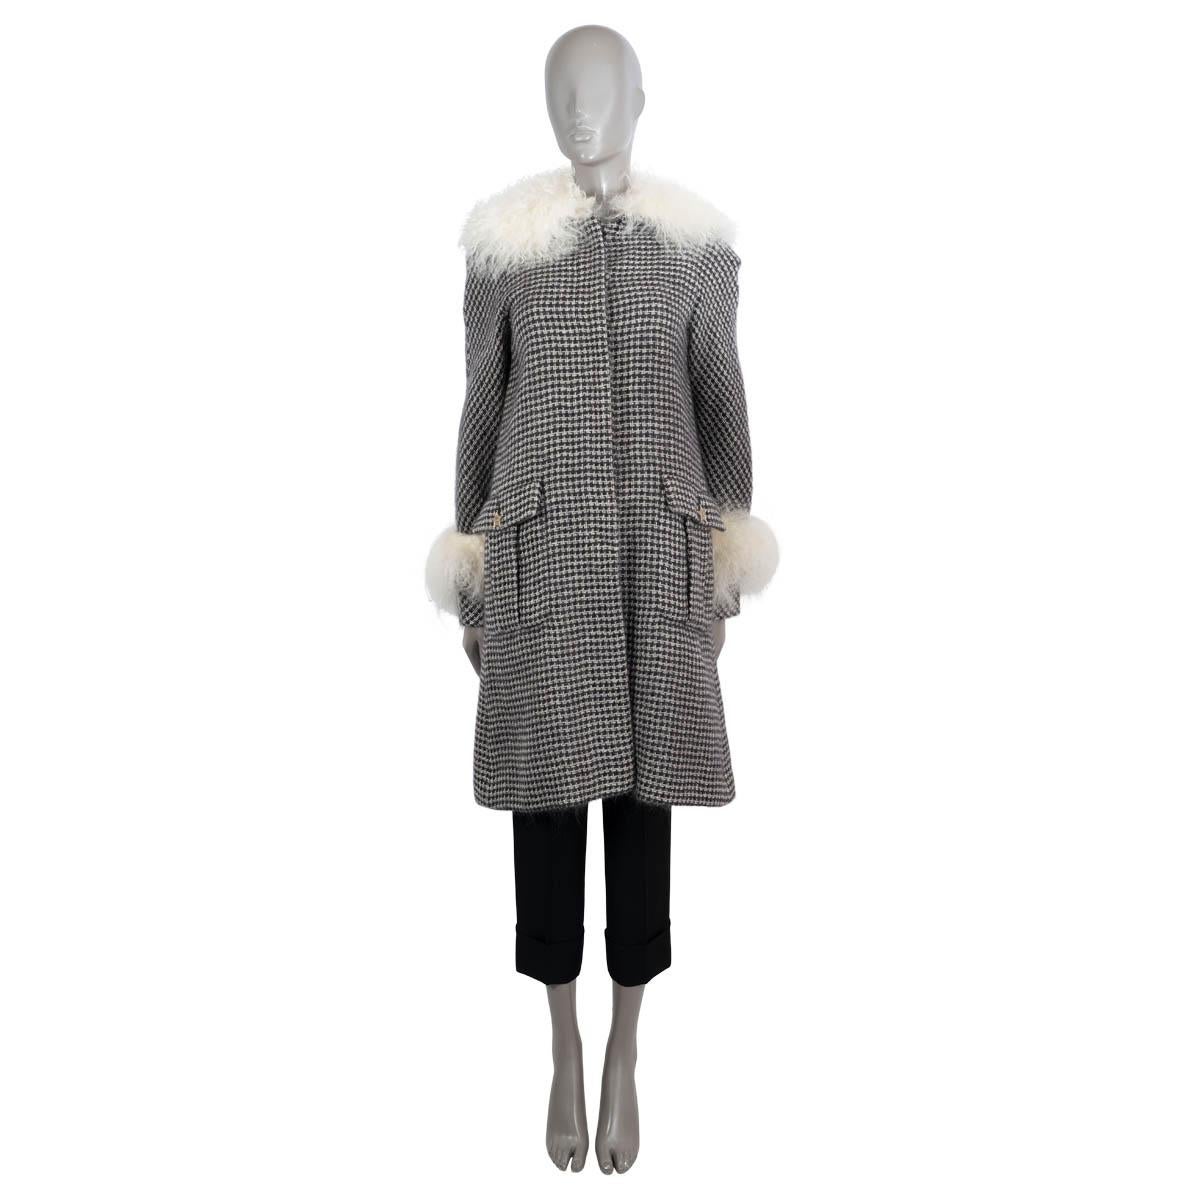 100% authentic Chanel tweed coat in black and white mohair (100%). Features ivory shearling collar and cuffs, two buttoned flap pockets and belted cuffs. Closes with silver-tone start buttons. Lined in silk (100%). Has been worn and is in excellent